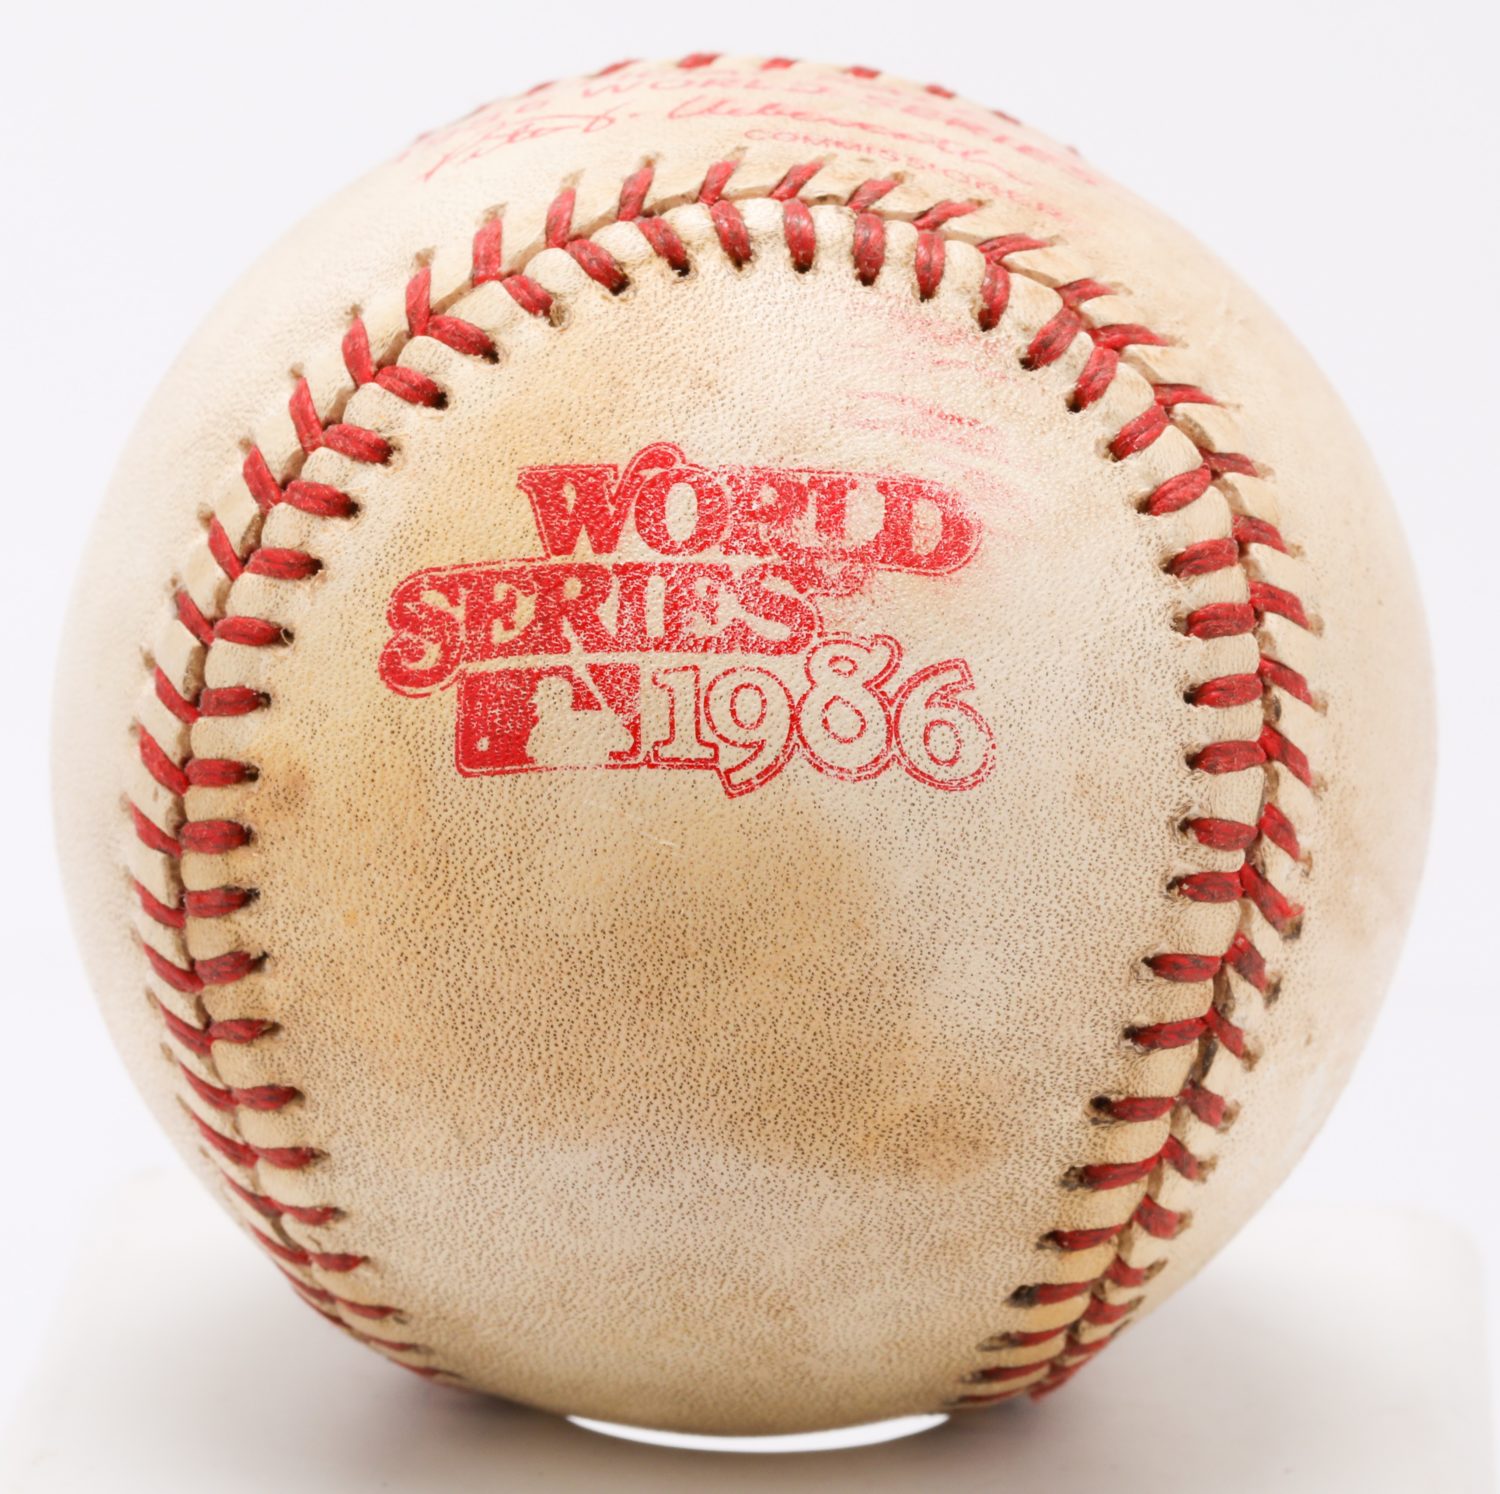 1986 World Series Game-Used Ball with World Series Logo Shown